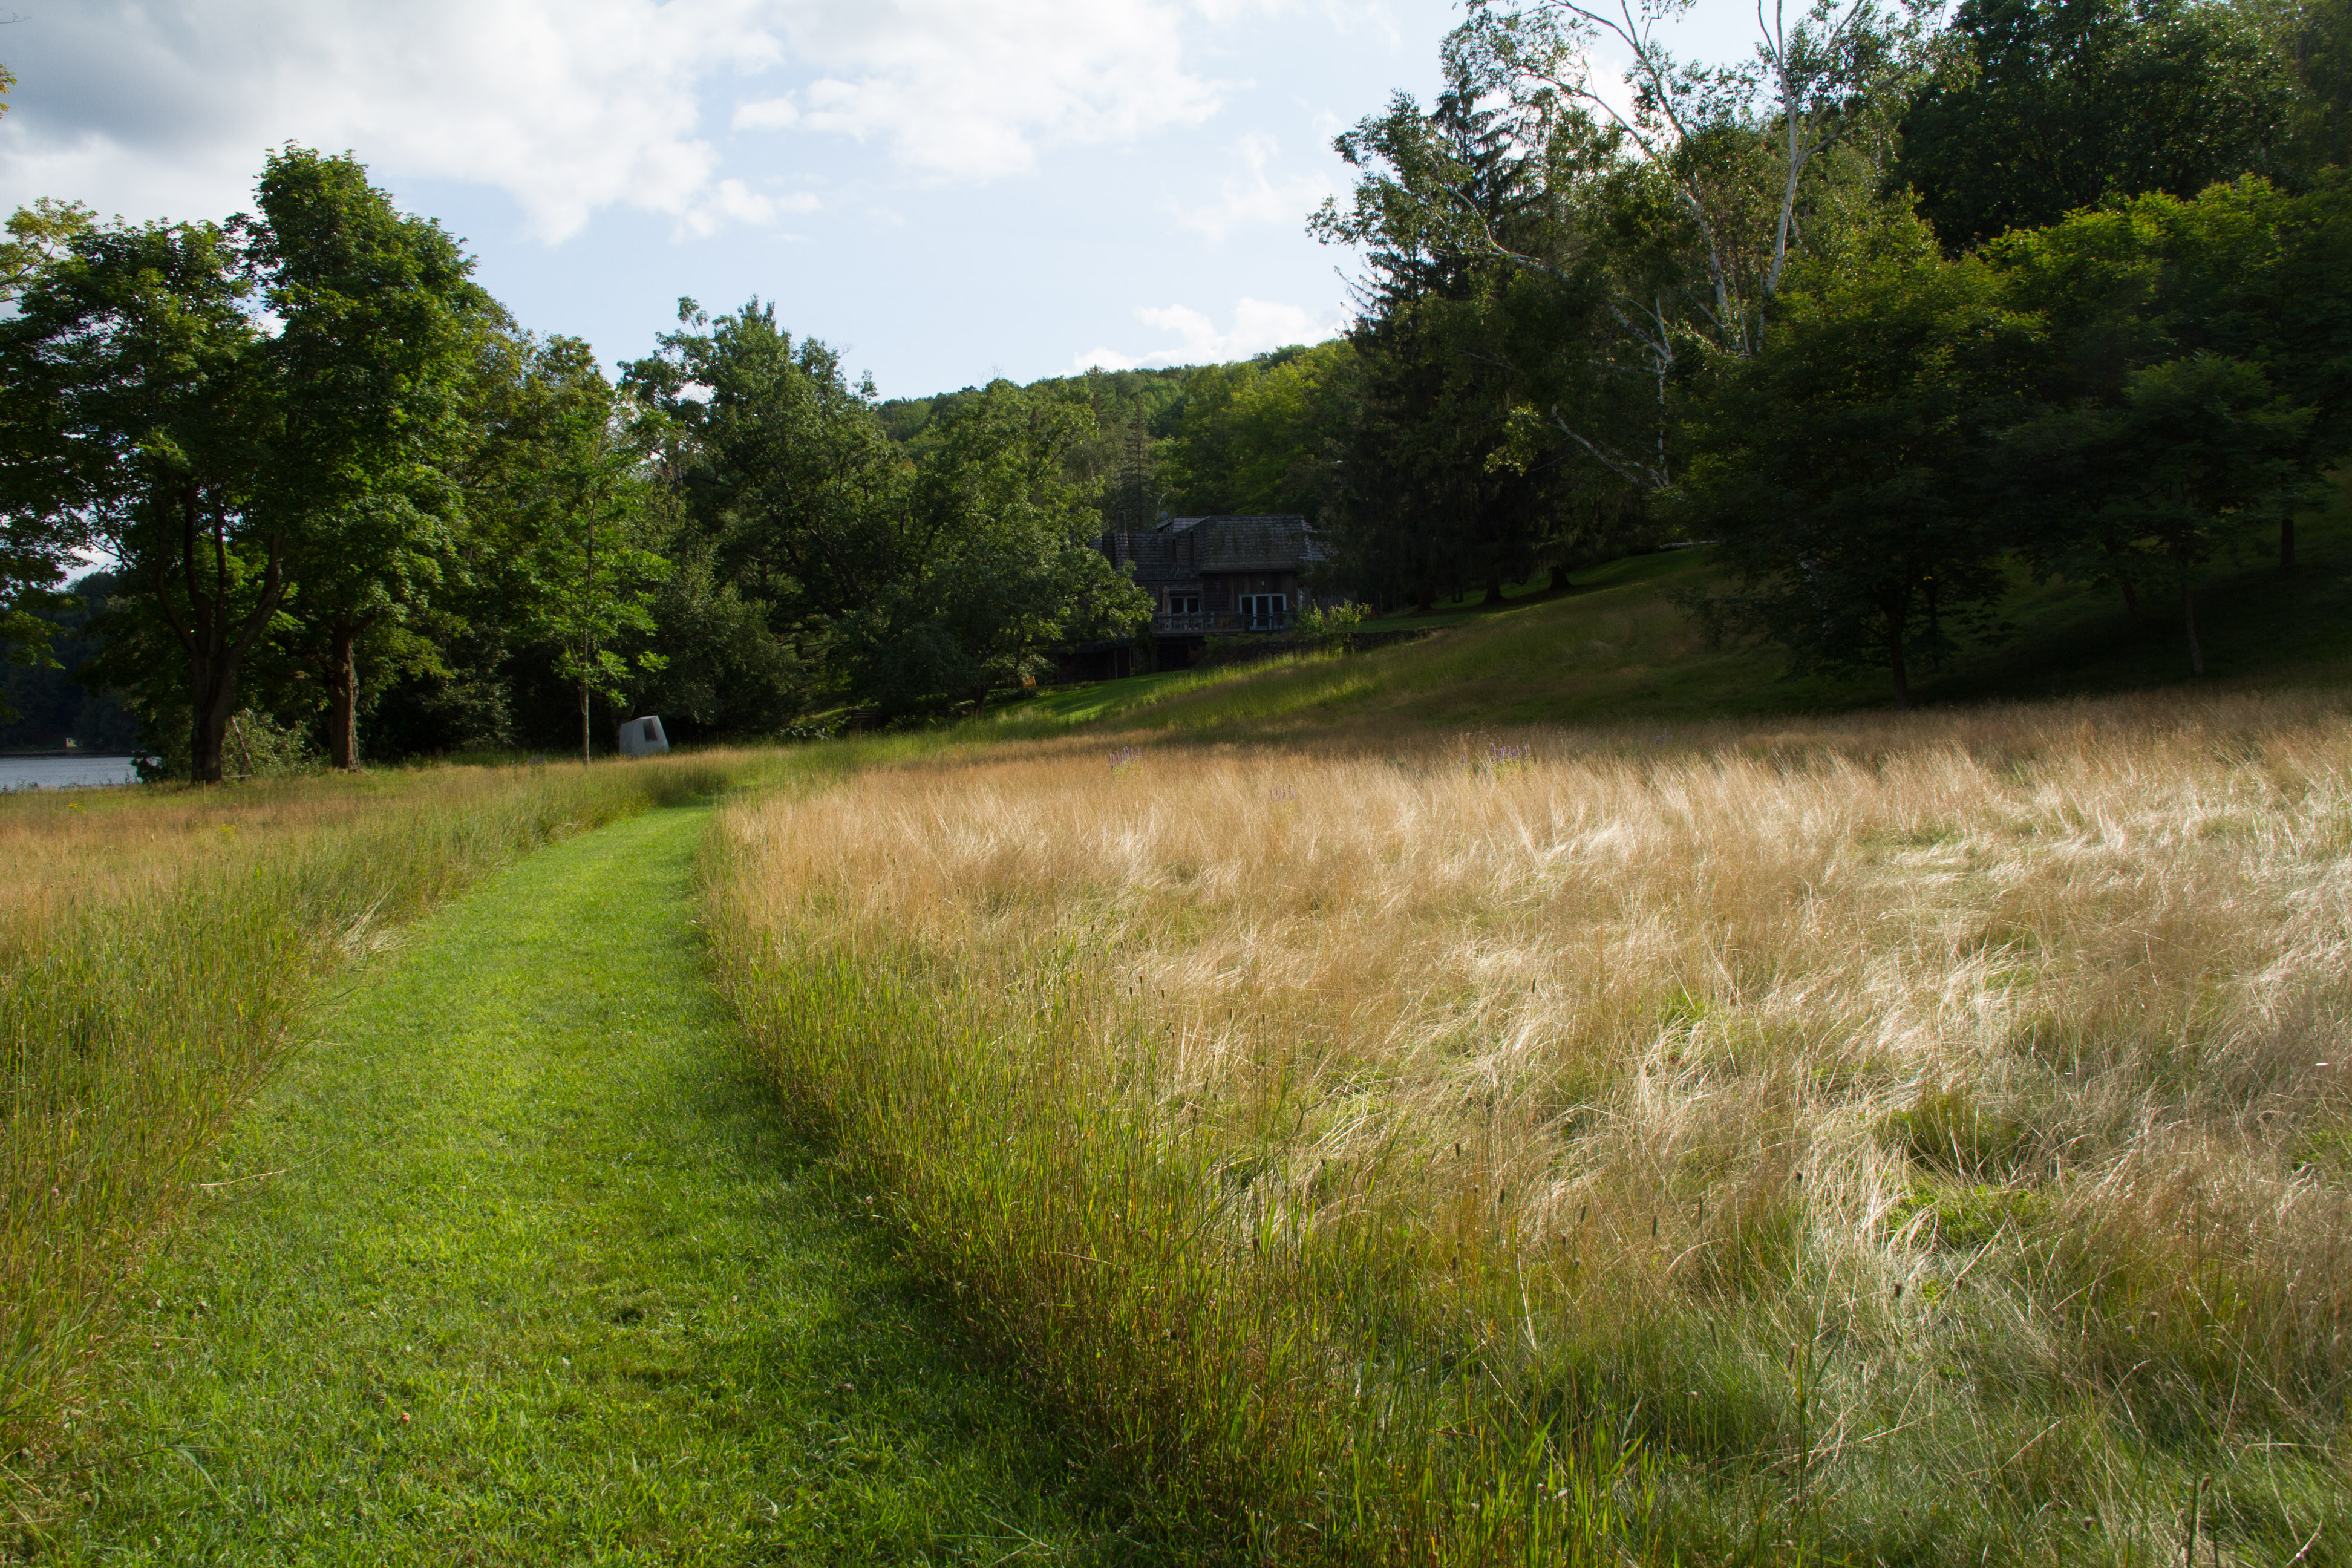 This path leads through the Big Meadow beside the house.